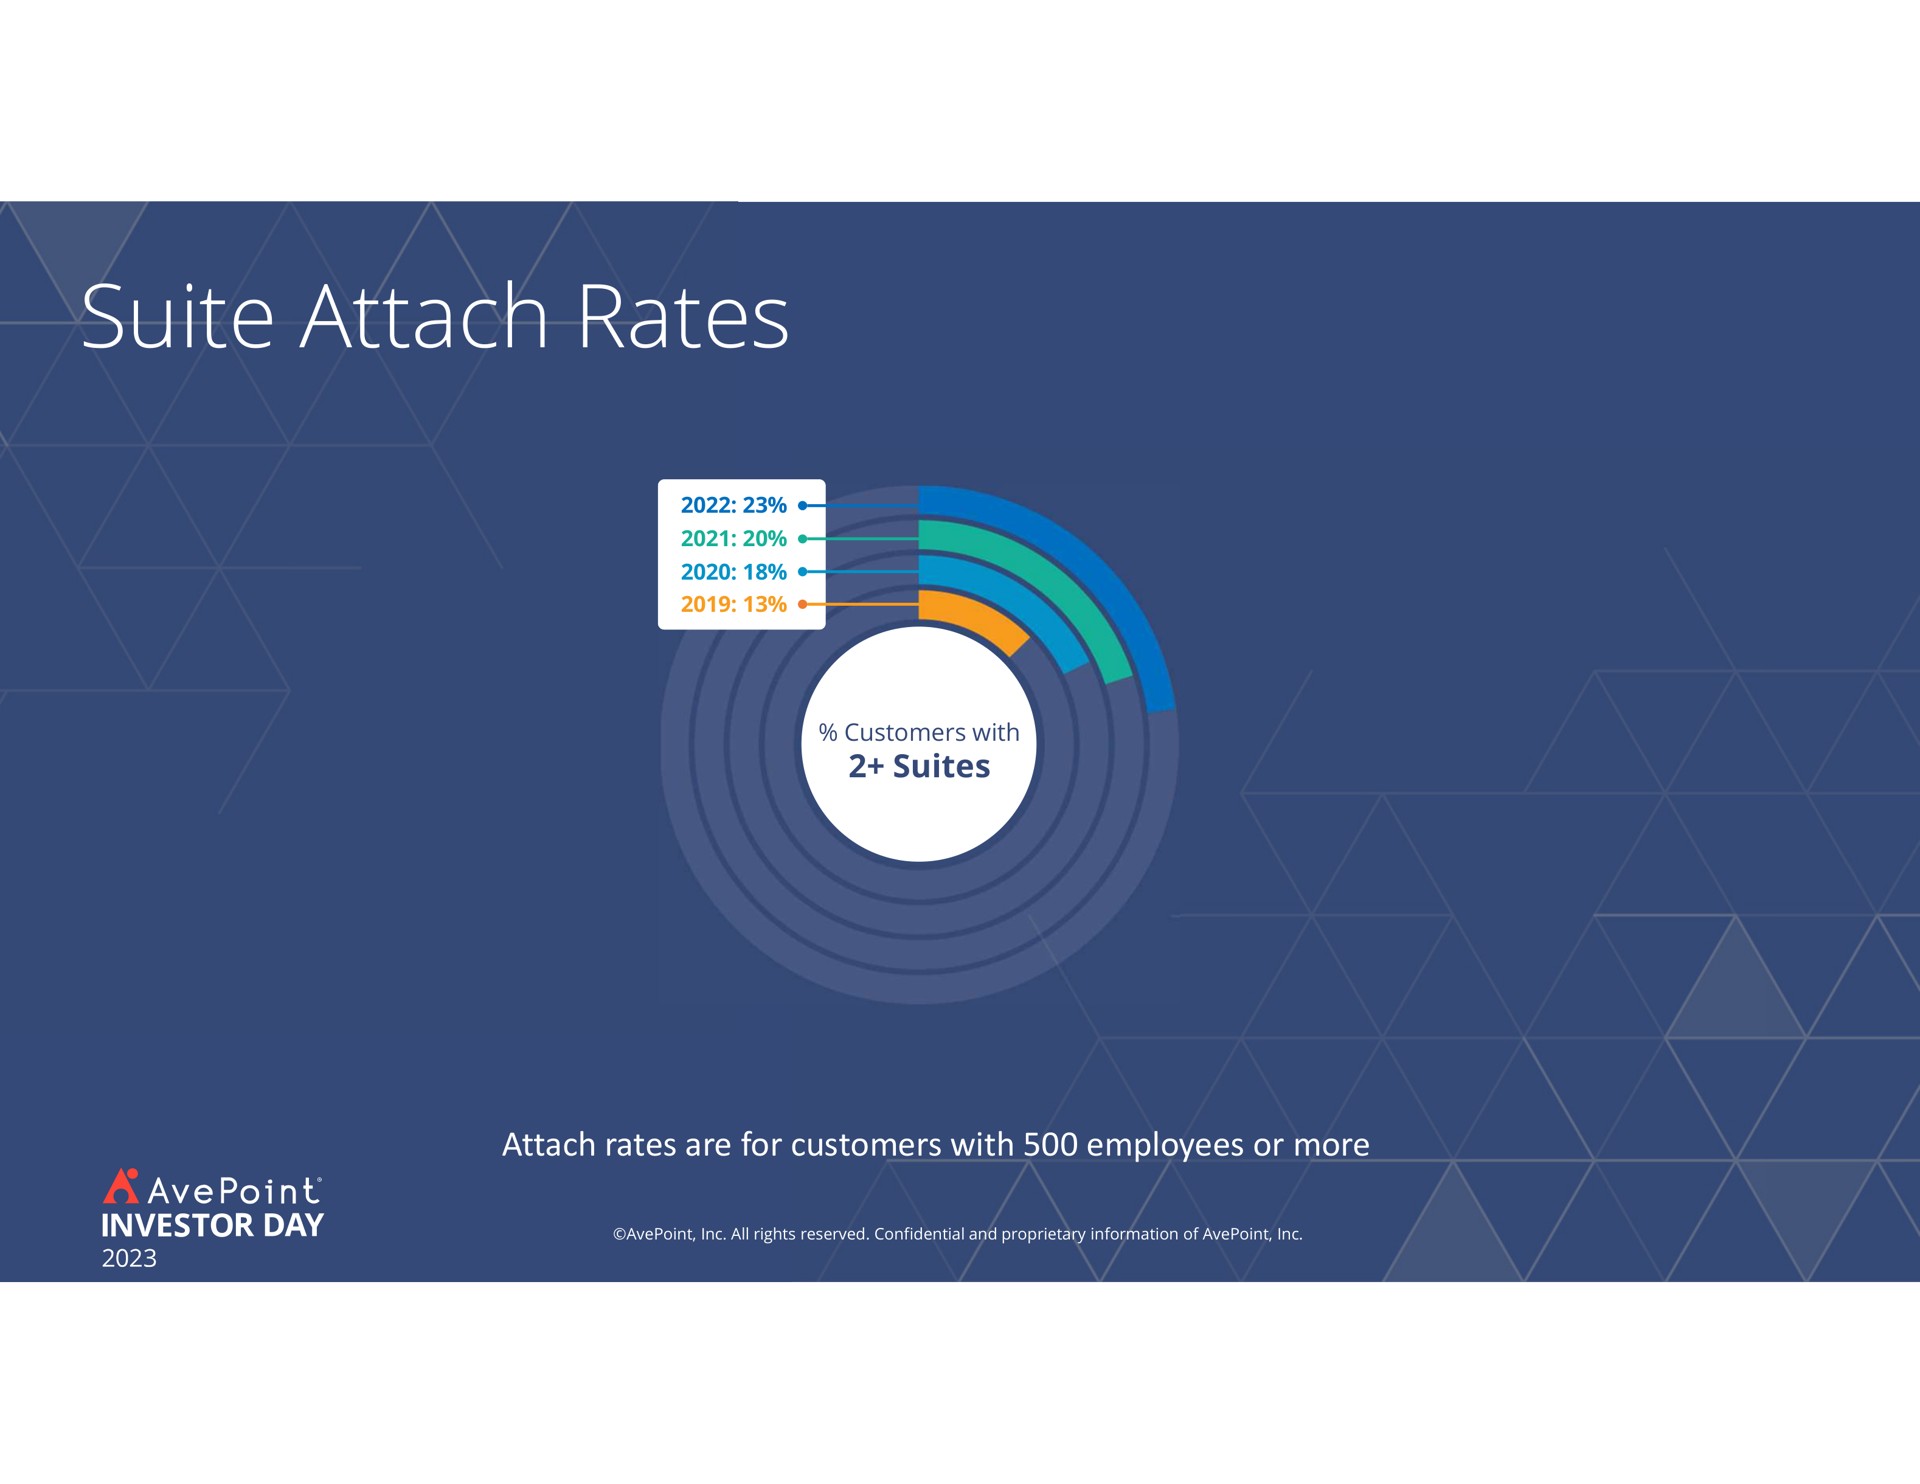 suite attach rates are for customers with employees or more | AvePoint